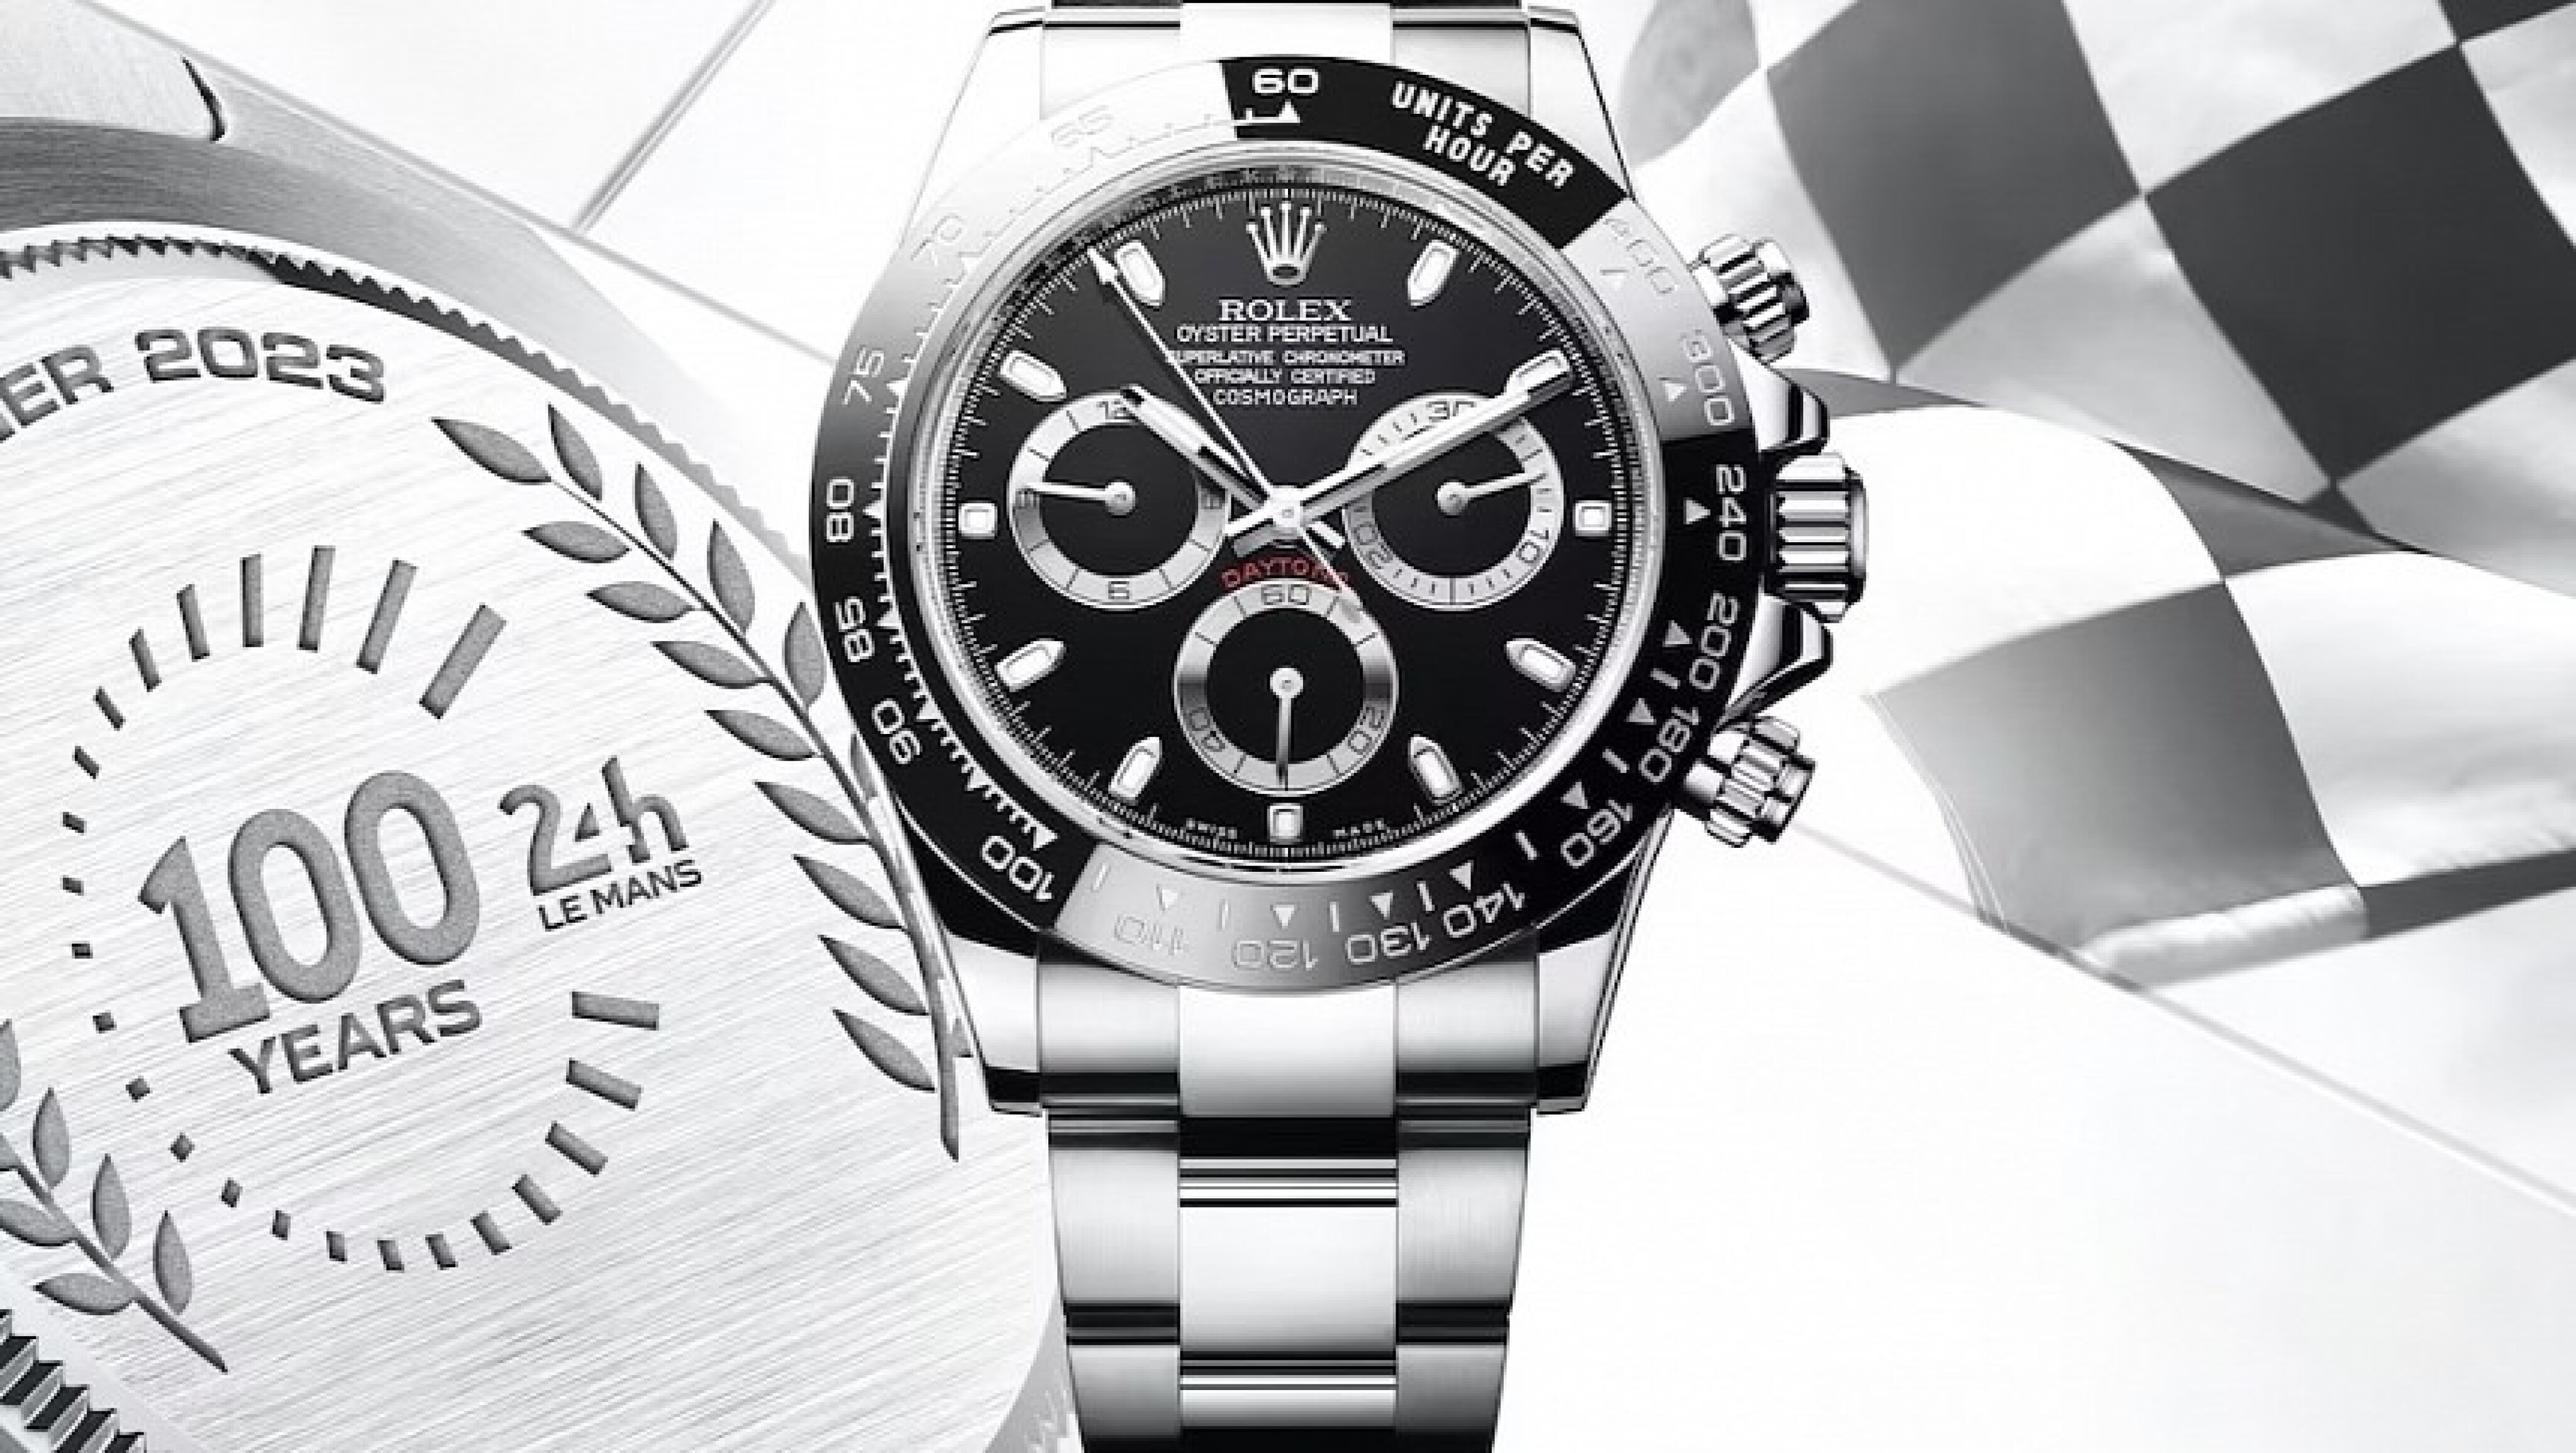 a28a3767/2023 le mans 10 things to watch rolex celebrates one century of le mans racing with specially engraved daytona chronograph 216092 7 jpg